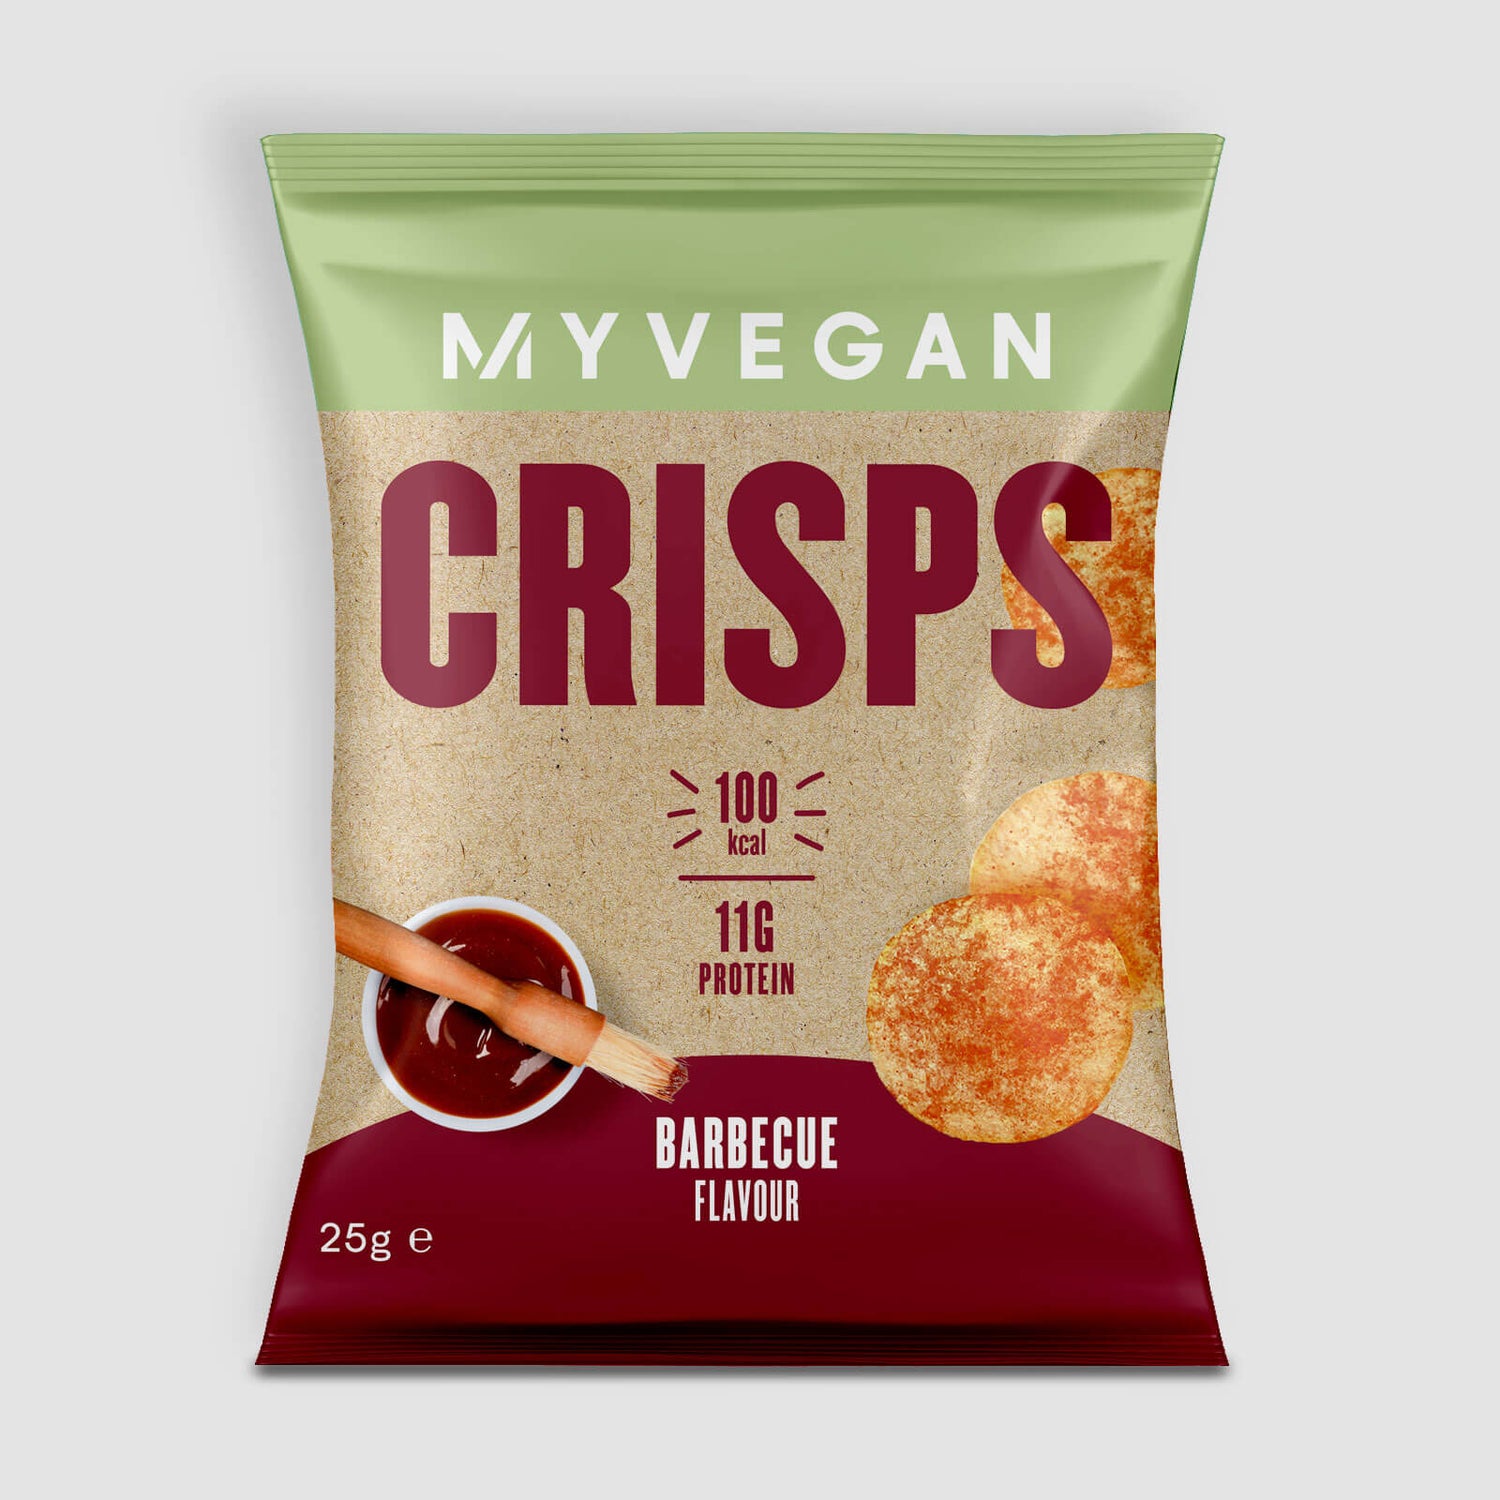 Popped Protein Crisps